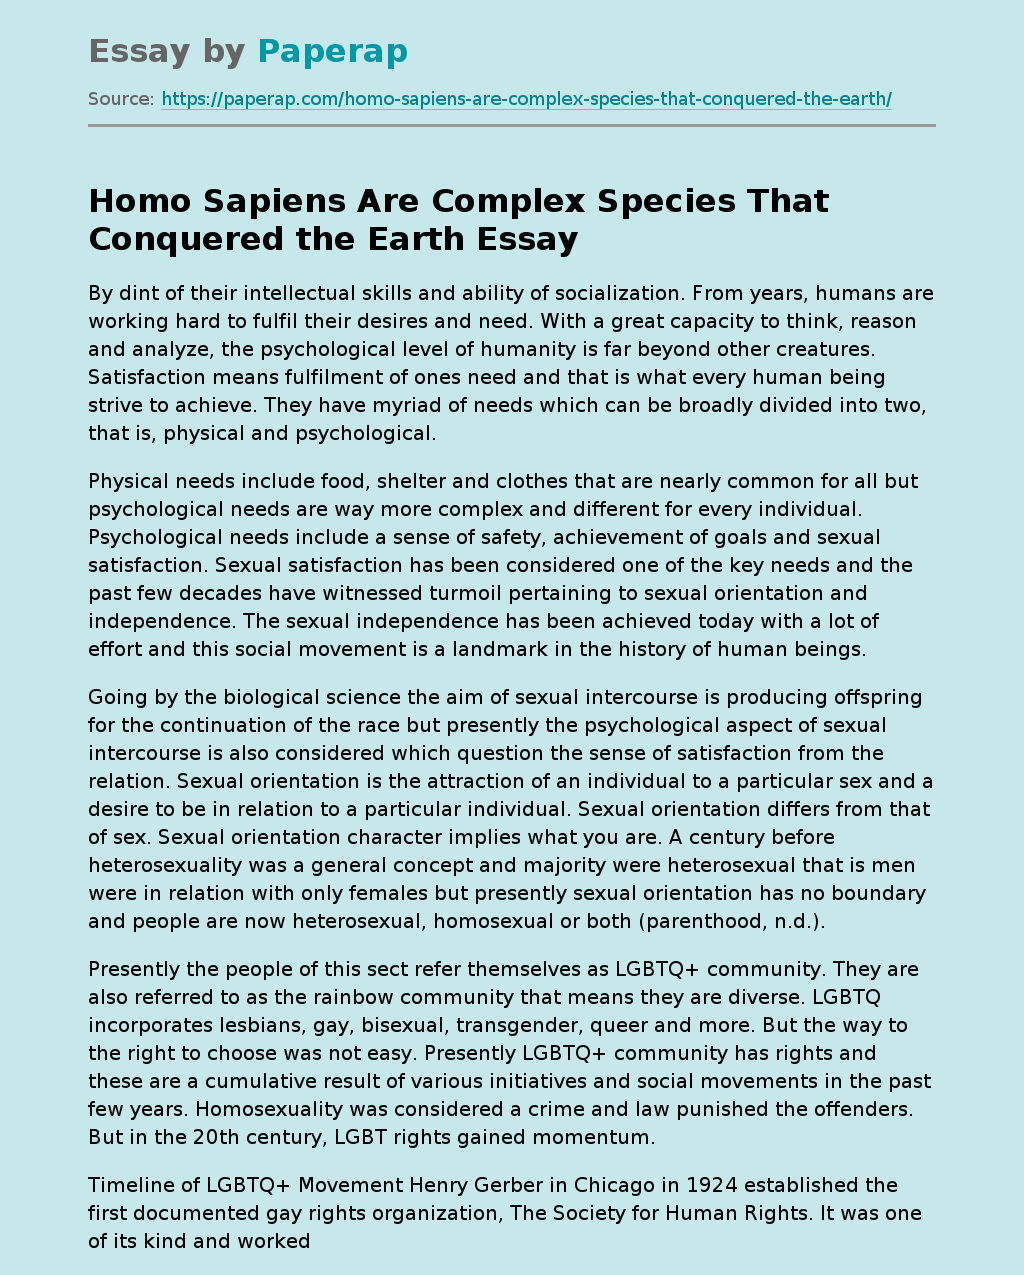 Homo Sapiens Are Complex Species That Conquered the Earth